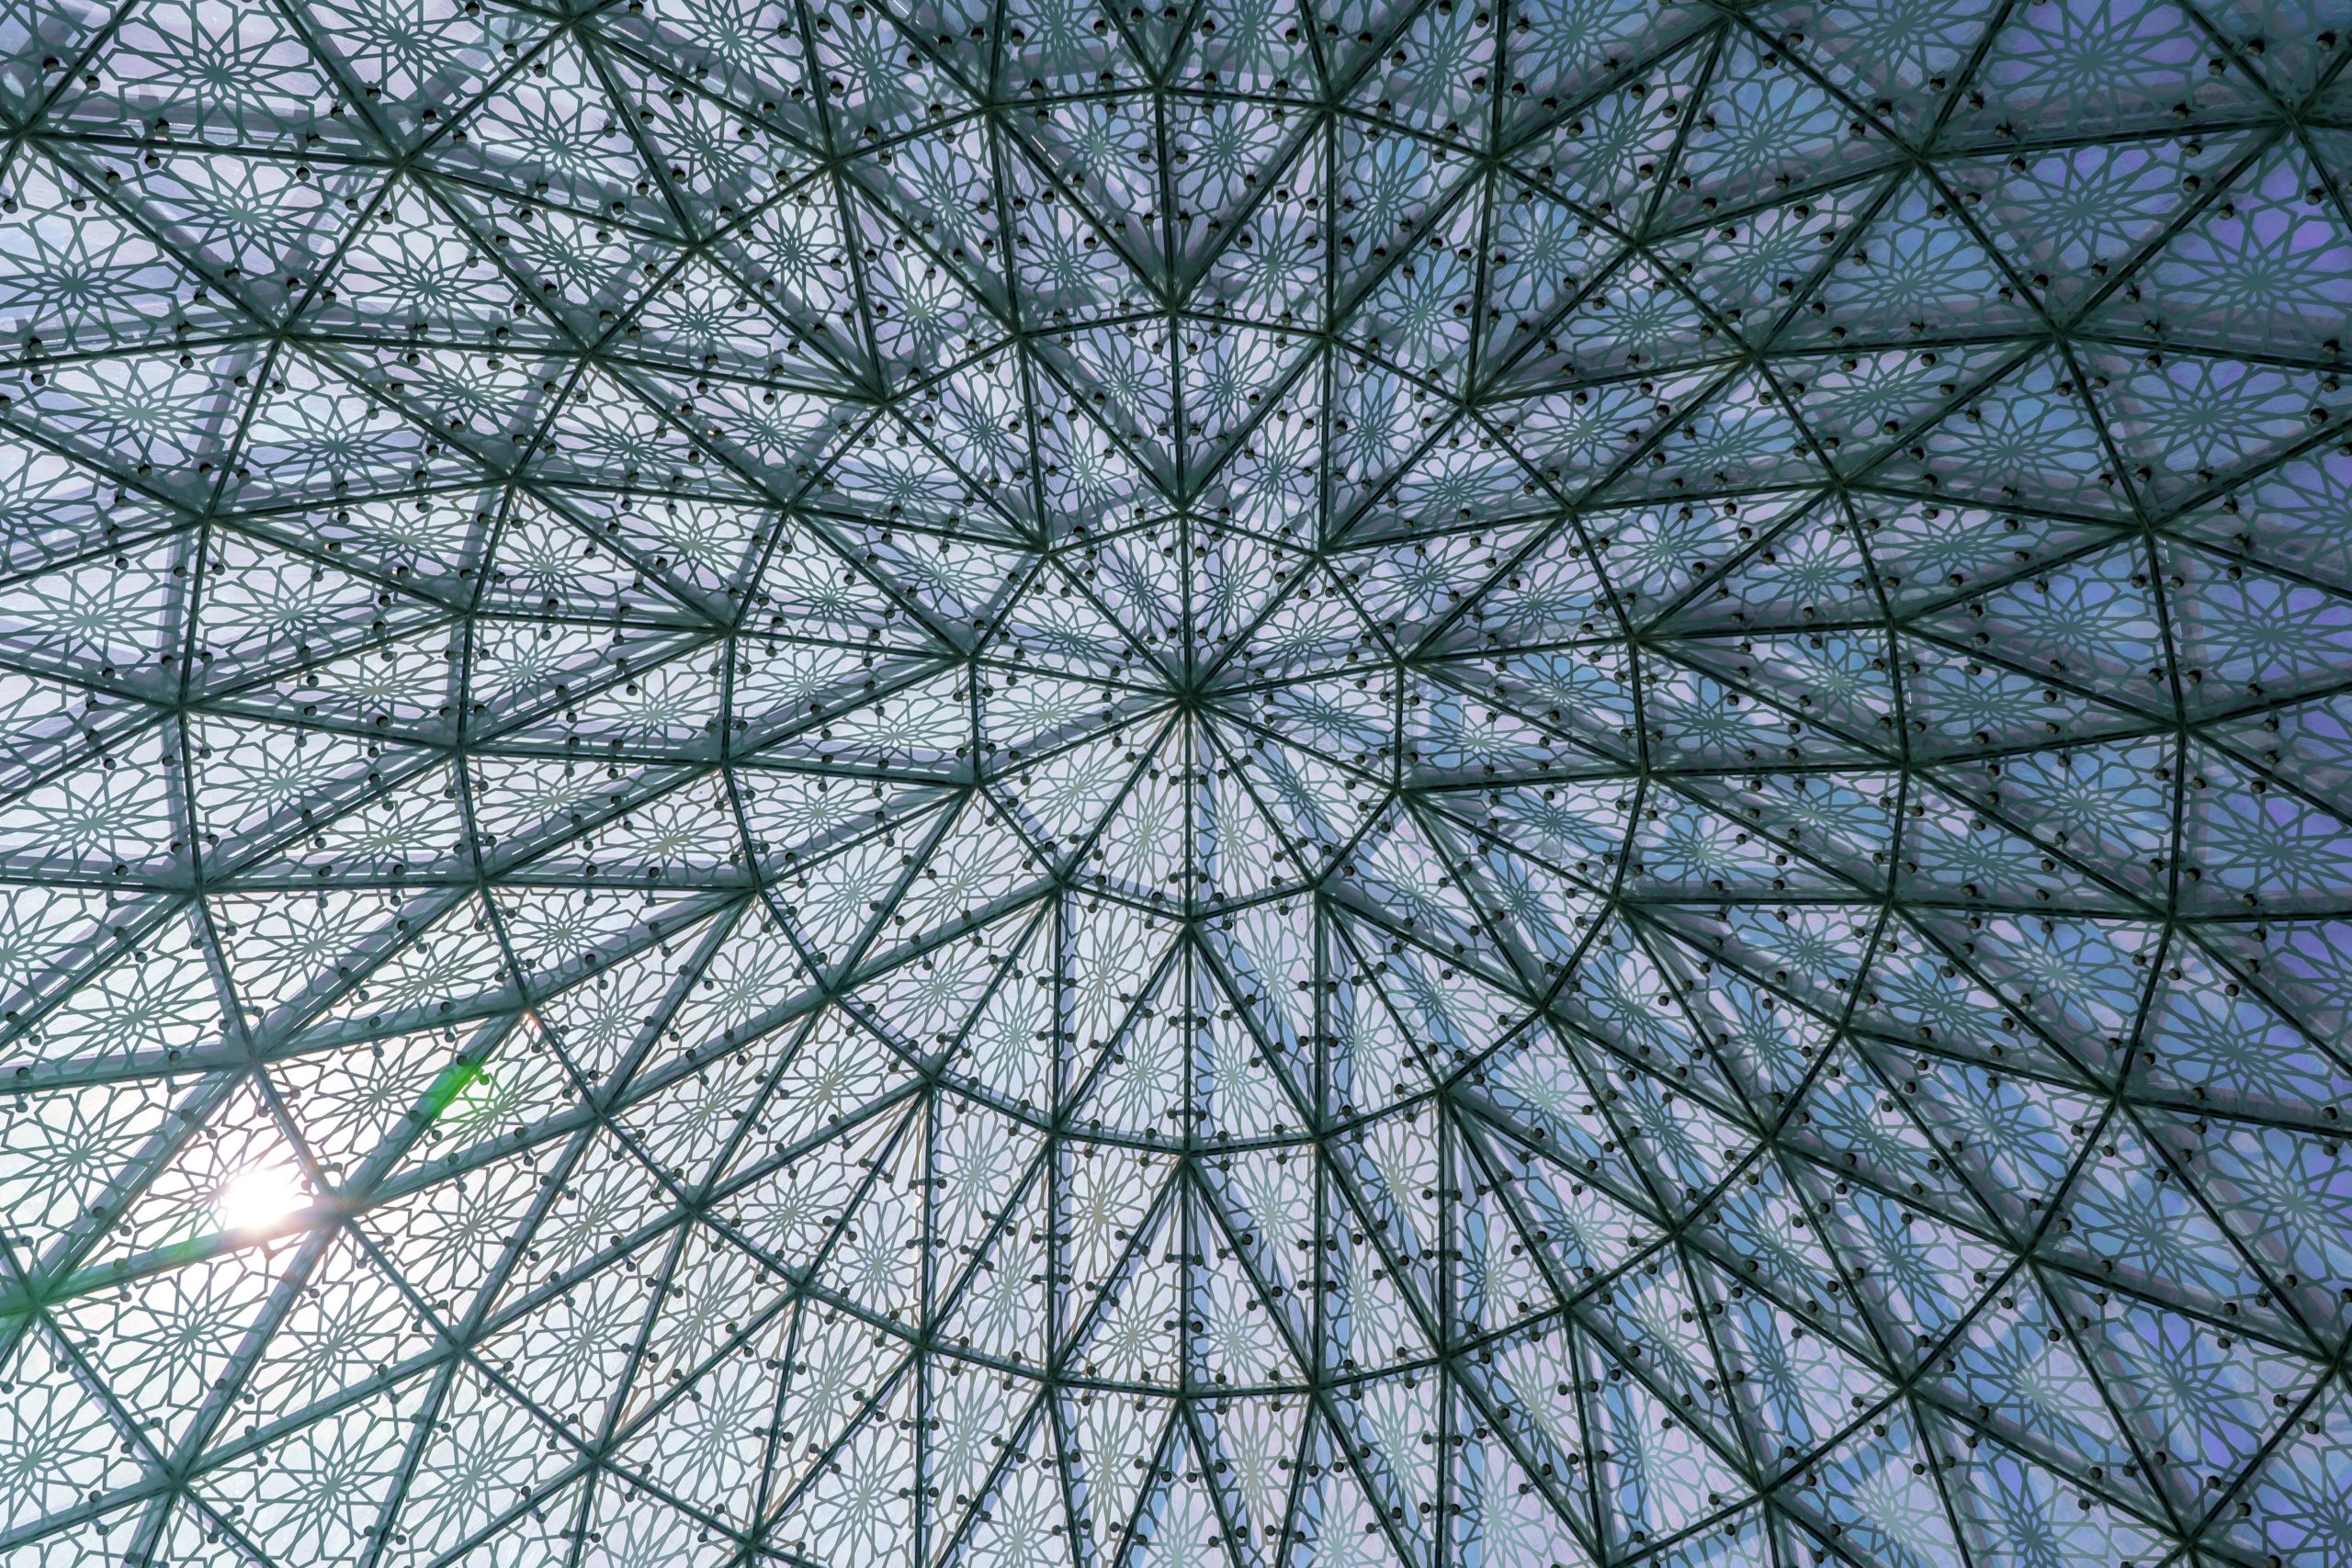 Photograph of an intricately patterned glass dome, taken from underneath